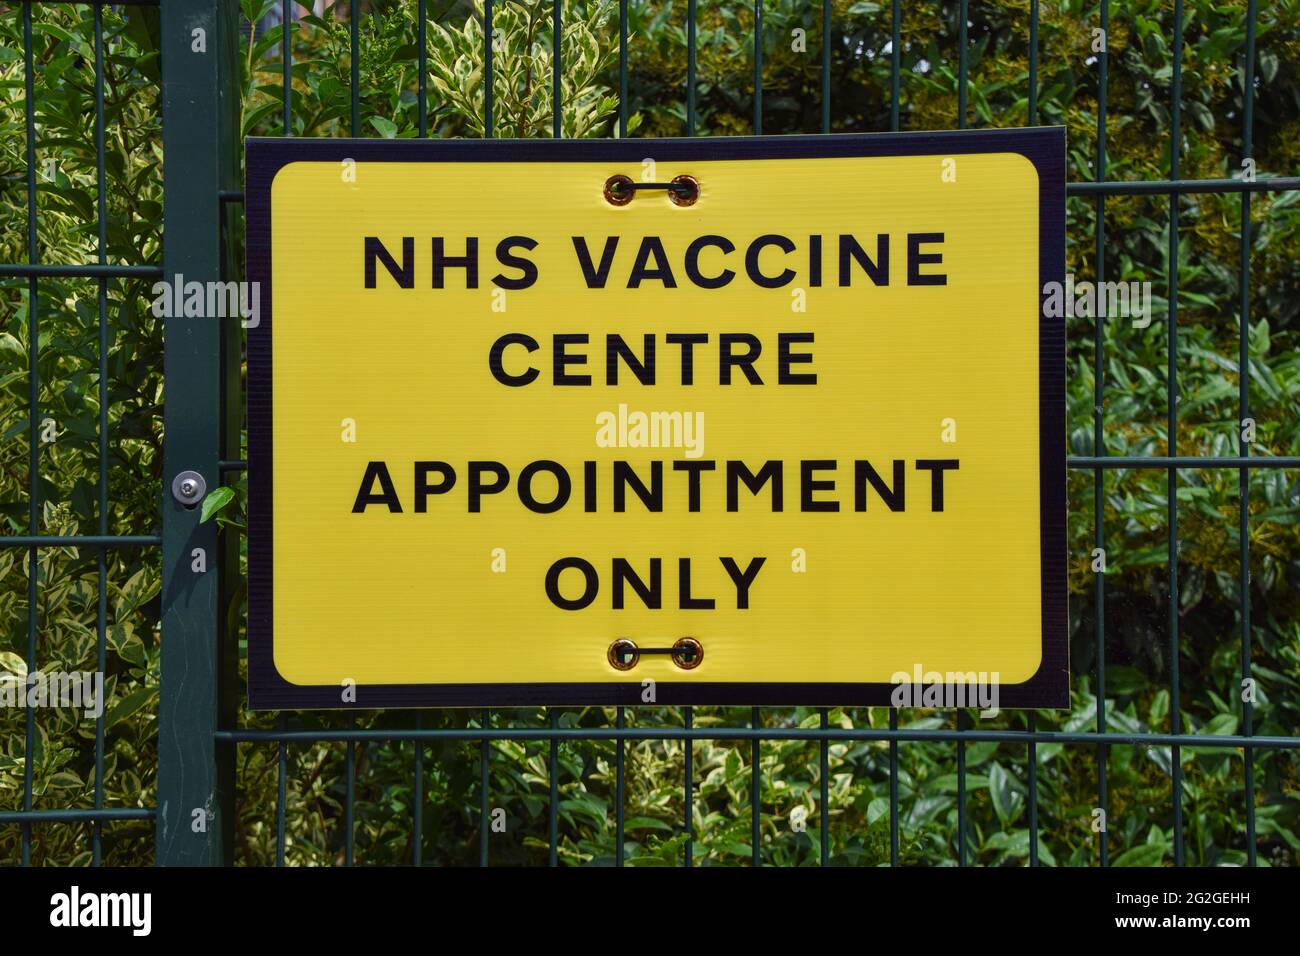 London, United Kingdom. 11th June 2021. NHS COVID Vaccine Centre in Wembley. Over 70 million coronavirus vaccination doses have been given in the UK to date, and over half of the adults have received their second dose. (Credit: Vuk Valcic / Alamy Live News). Stock Photo